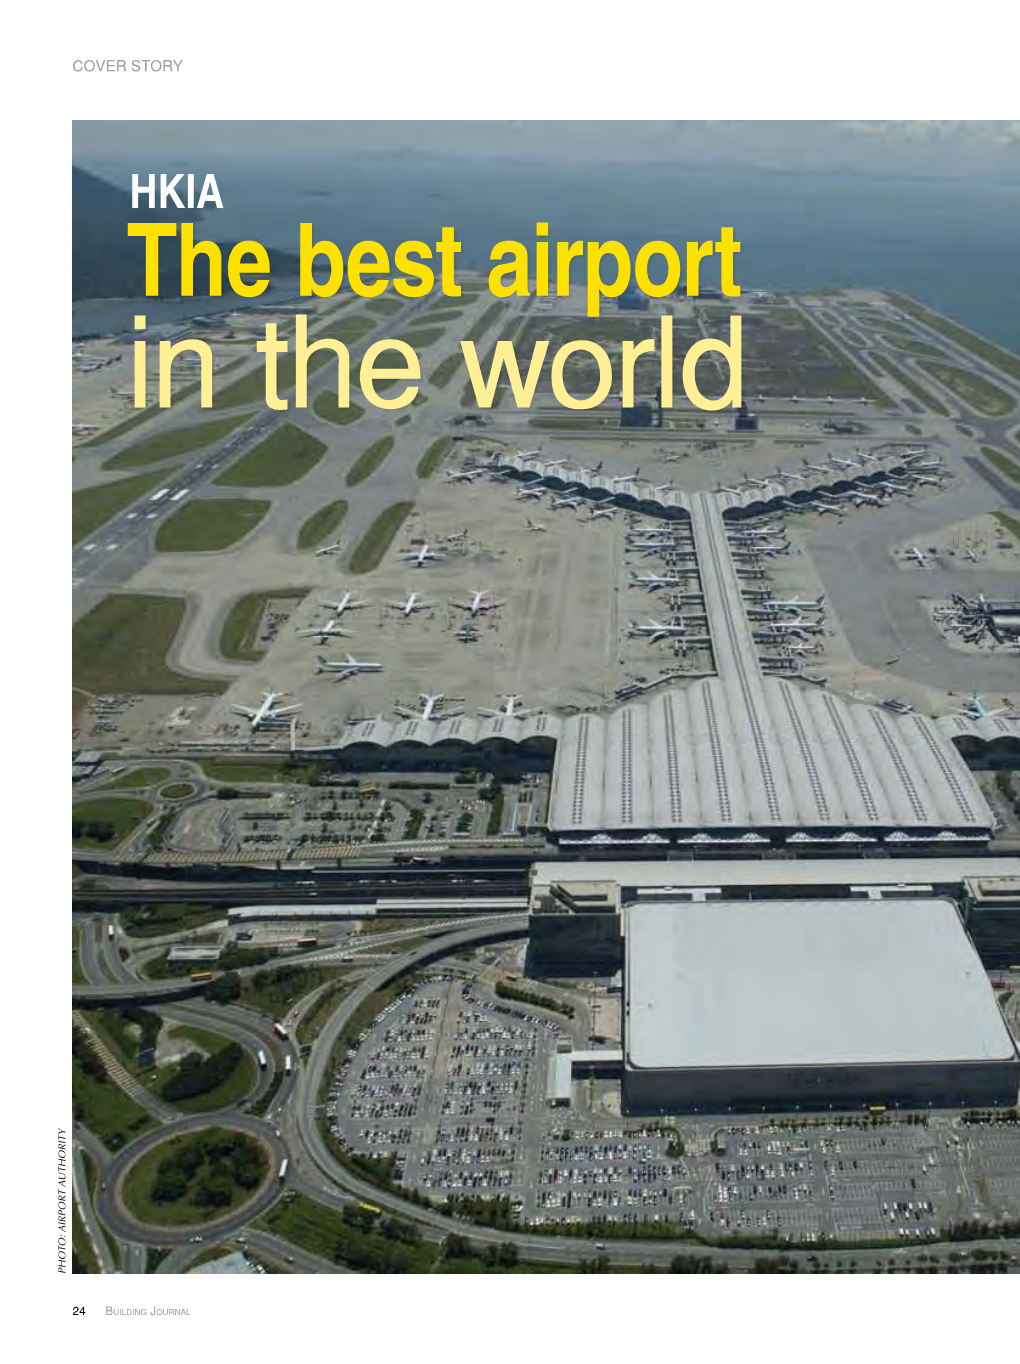 The Best Airport in the World PHOTO: AIRPORTPHOTO: AUTHORITY